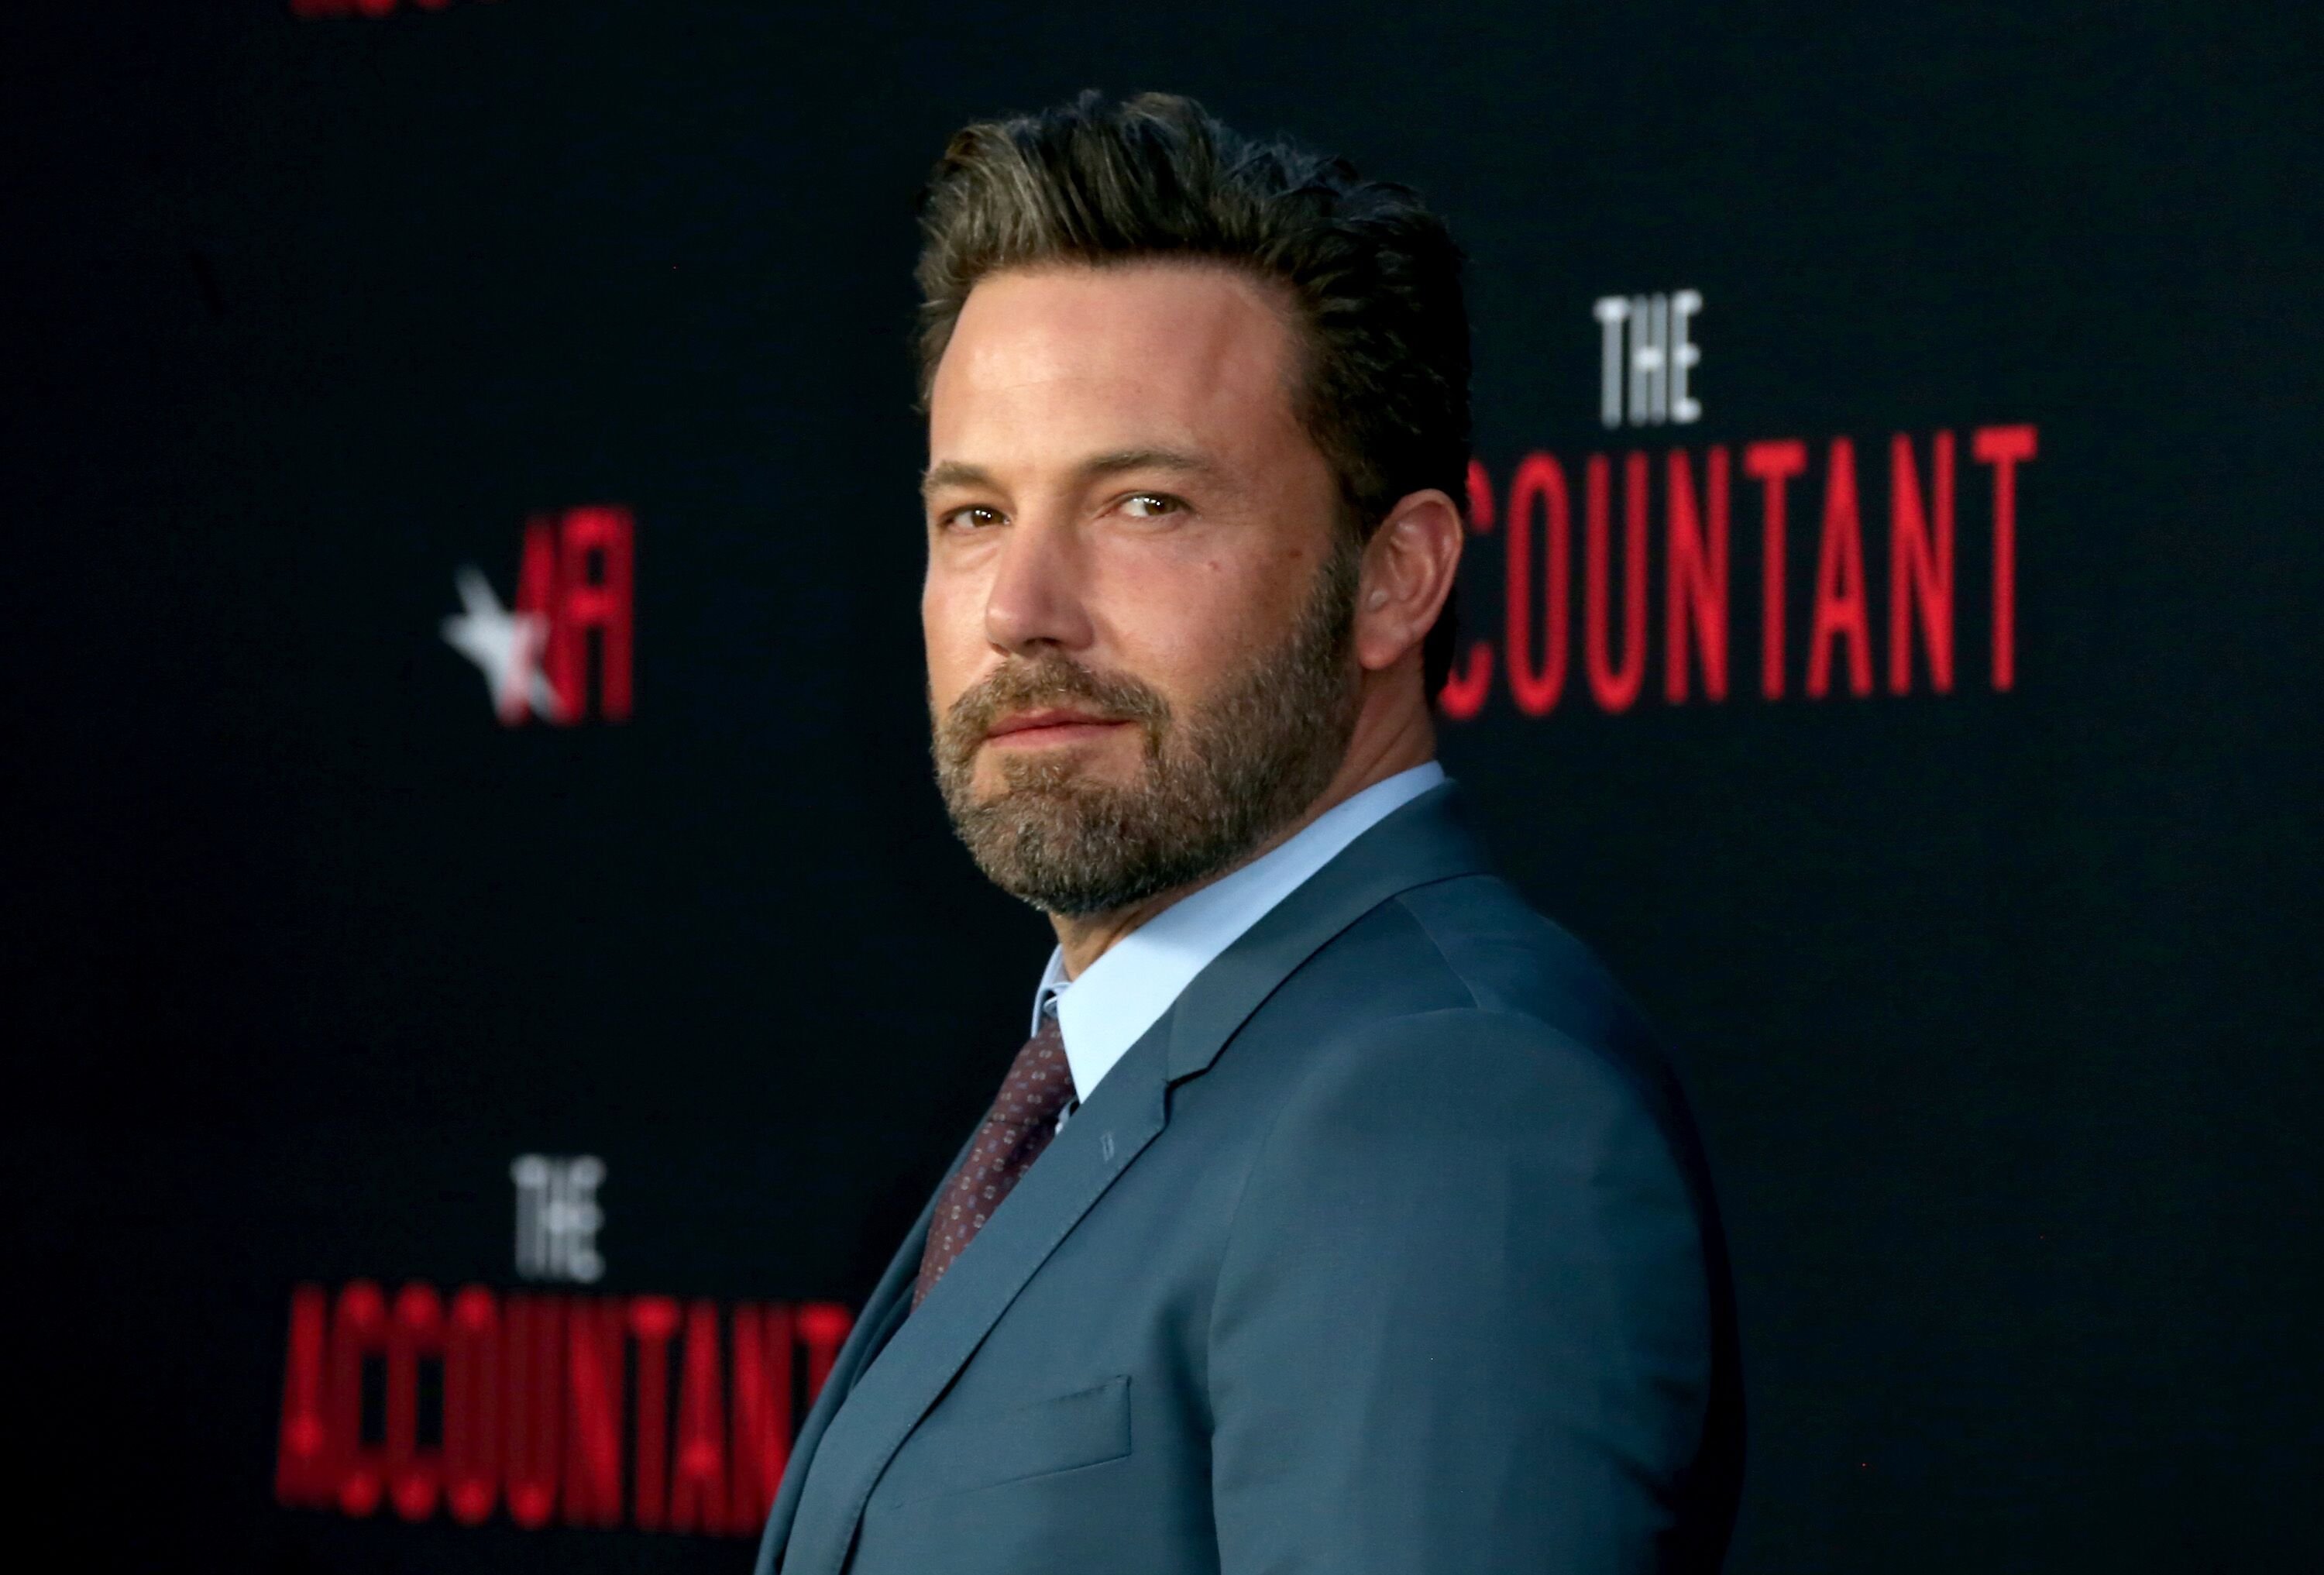 Ben Affleck at the premiere of Warner Bros Pictures' "The Accountant" at TCL Chinese Theatre on October 10, 2016 | Photo: Getty Images